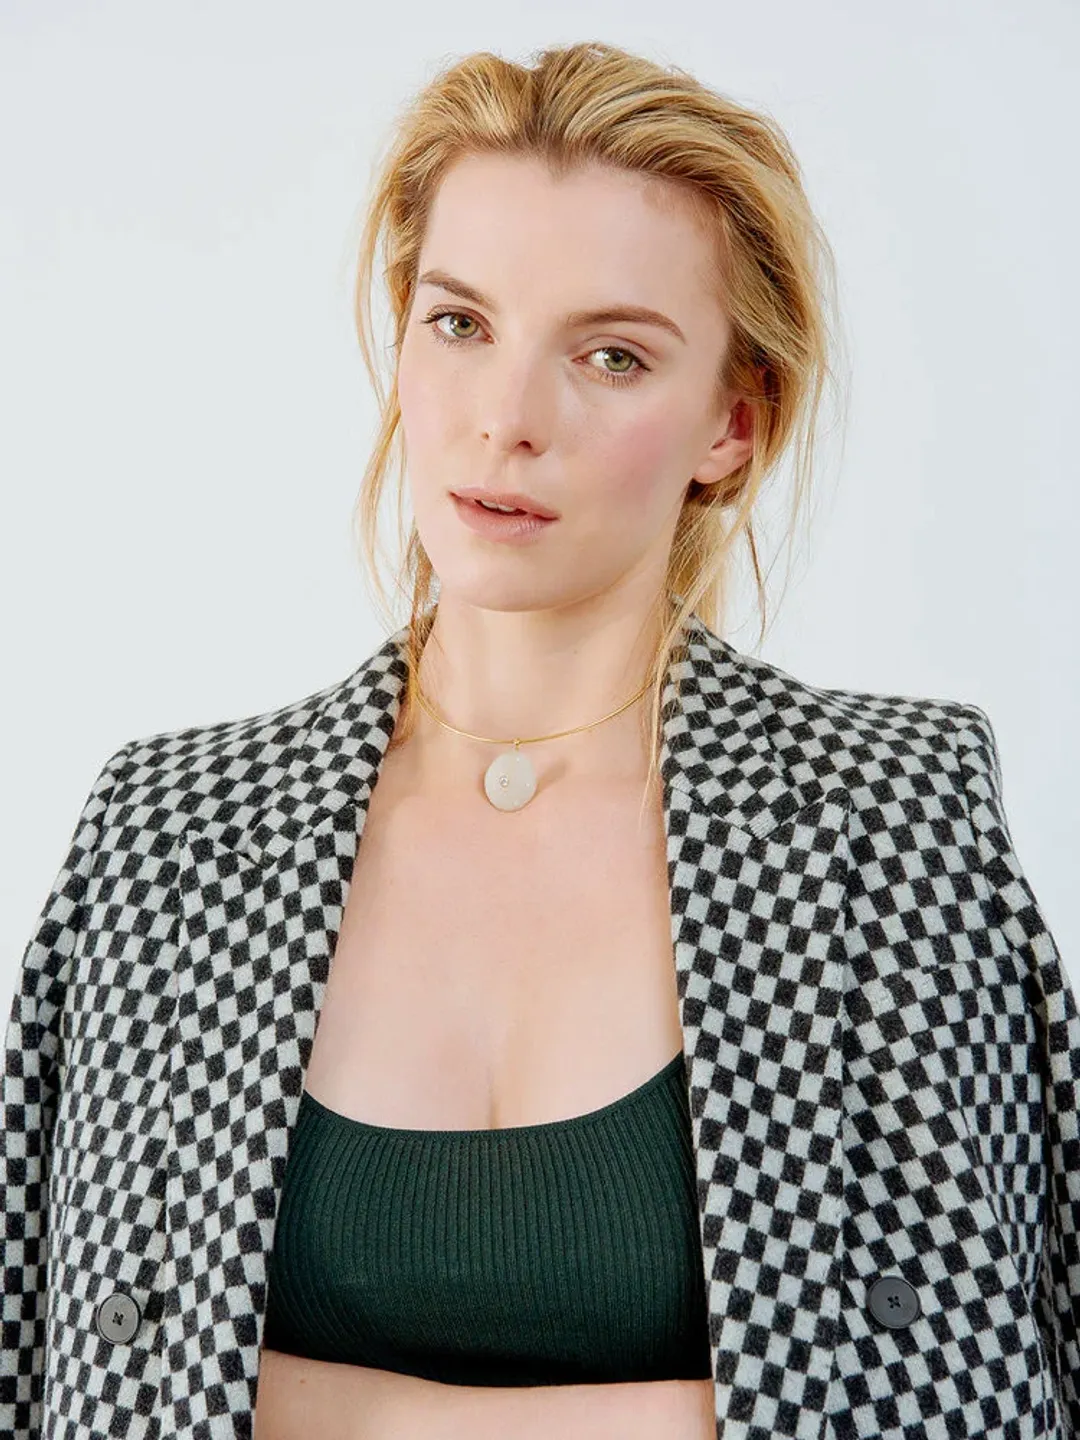 Betty Gilpin personal life